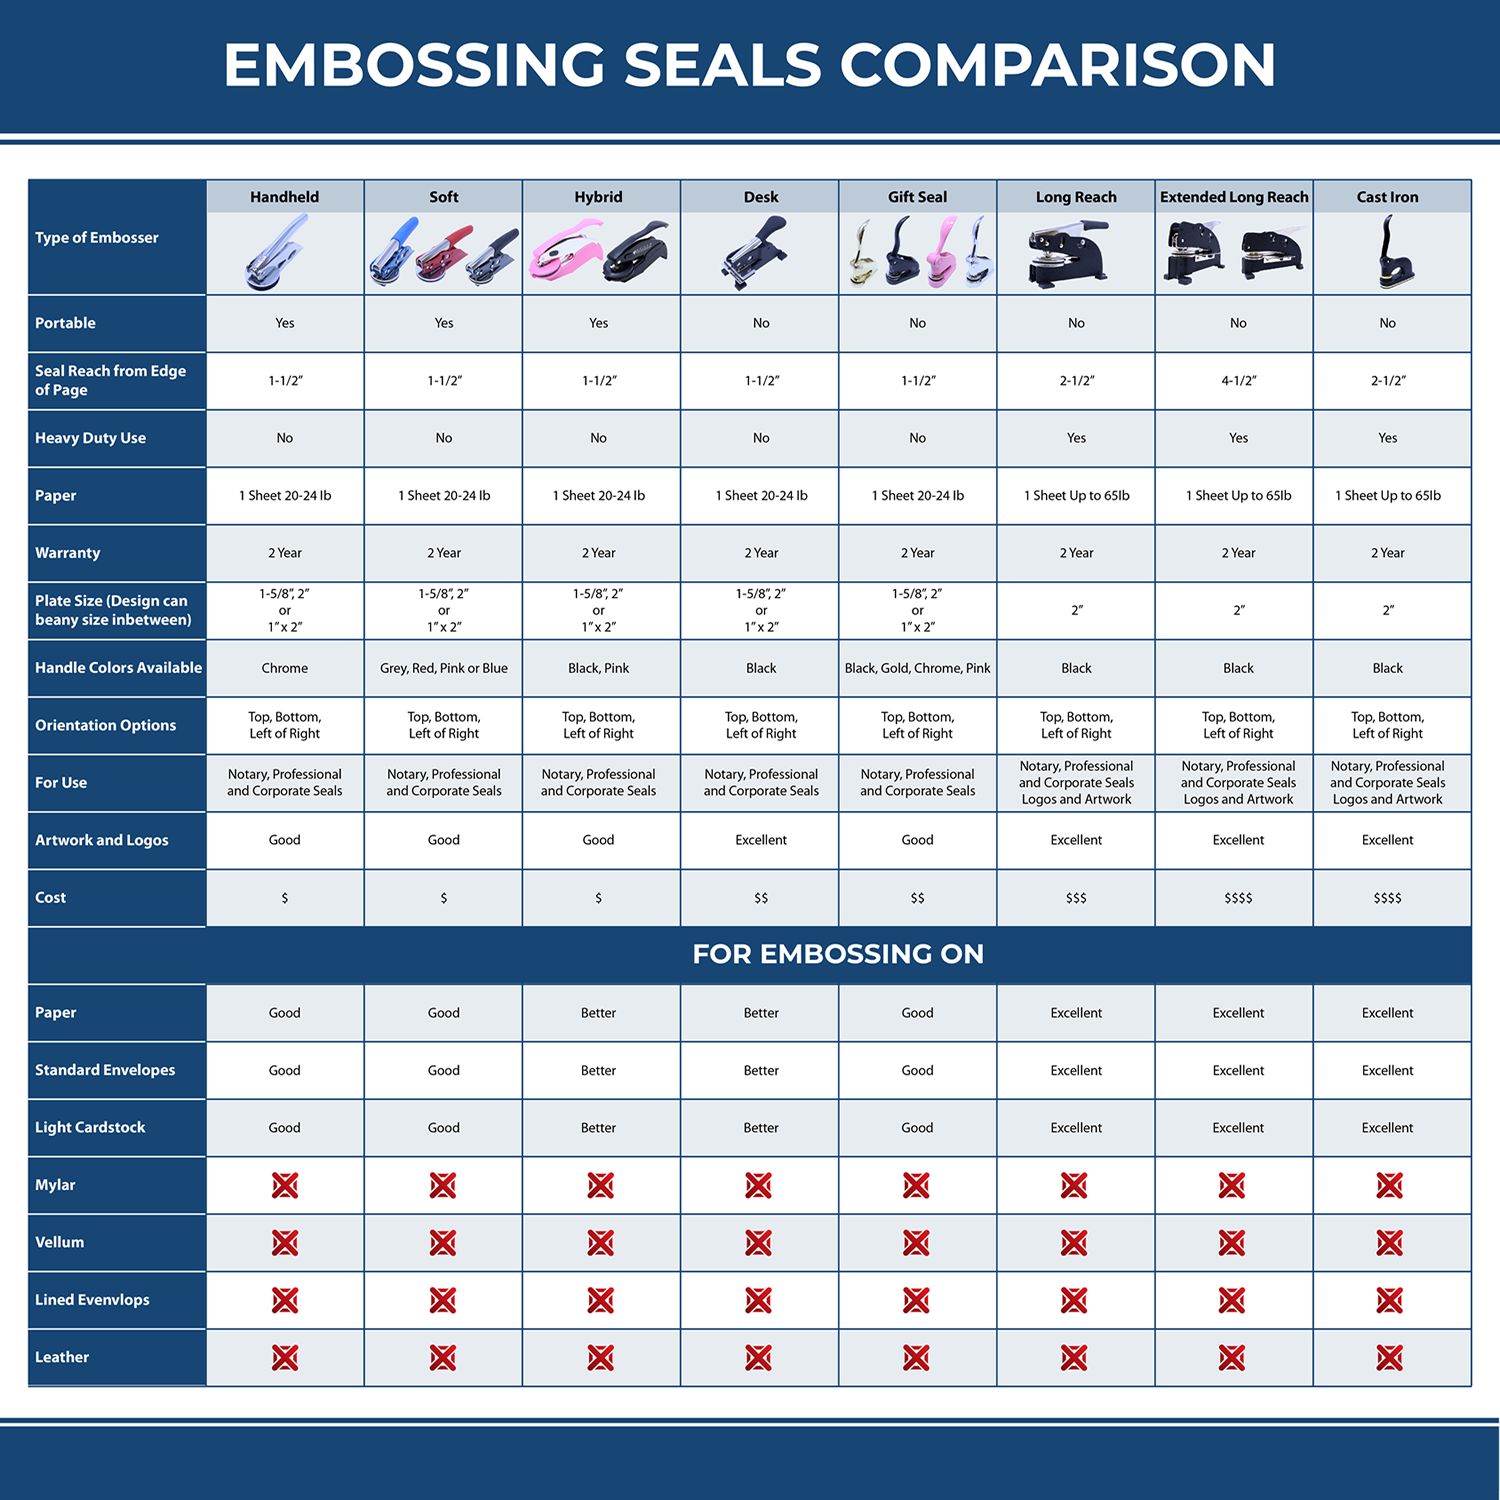 A comparison chart for the different types of mount models available for the Extended Long Reach New Mexico Surveyor Embosser.